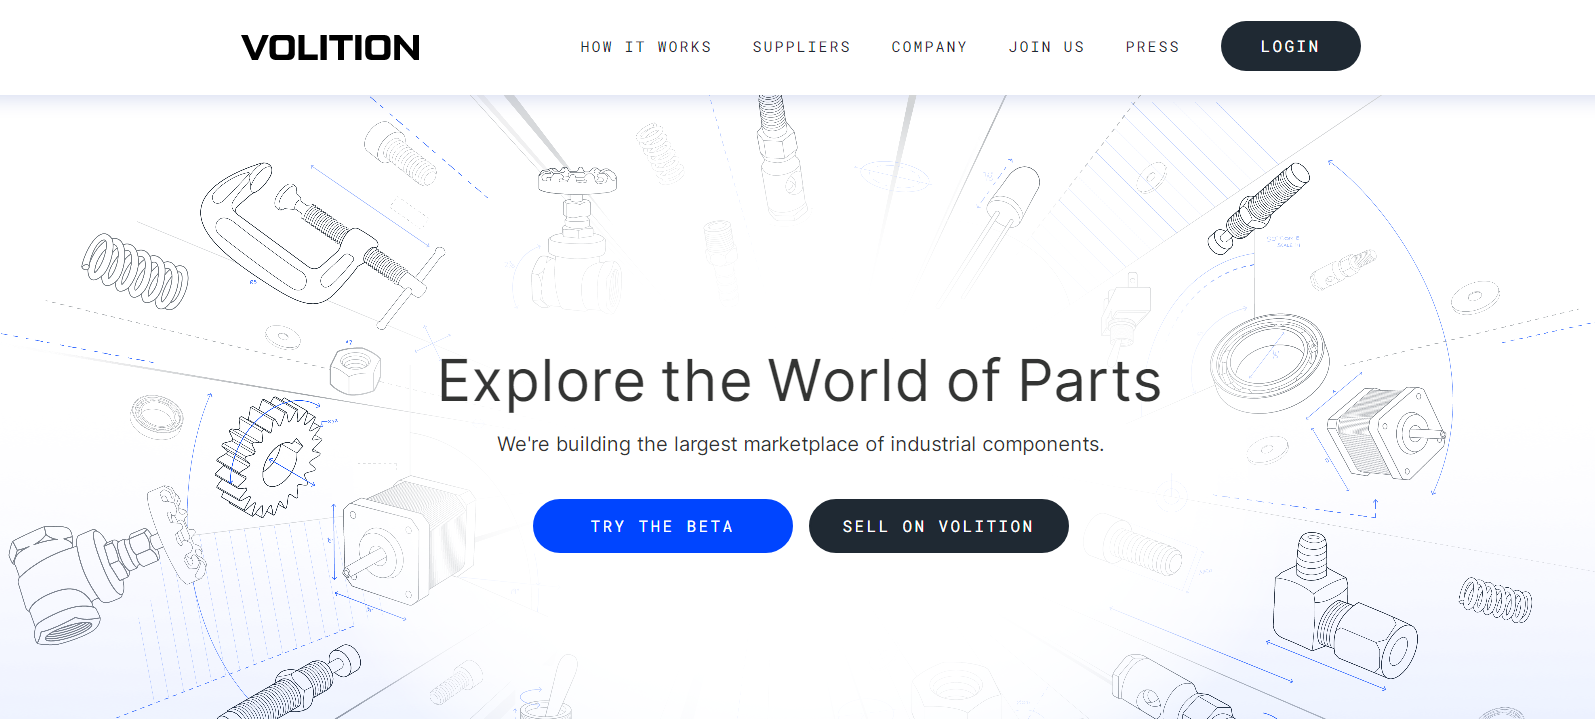 Volition Secures $11 Million in Seed Funding to Revolutionize Industrial Component Sourcing.